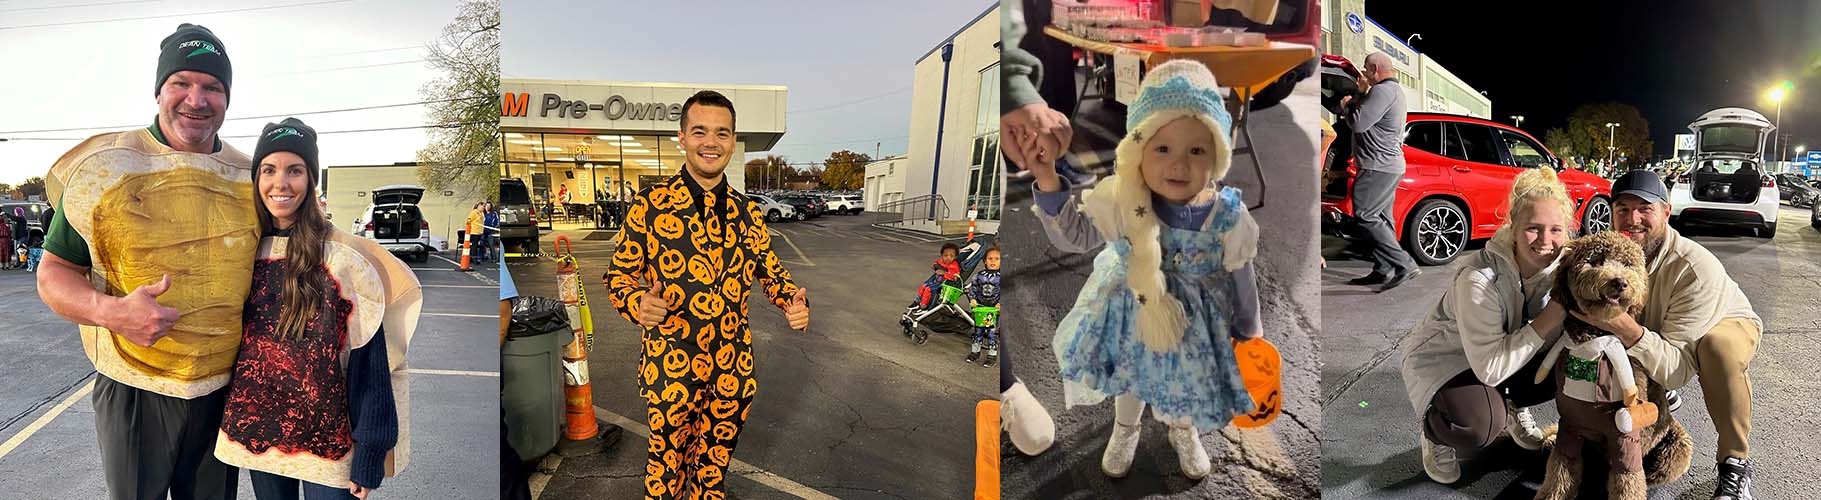 Collage of photos from Trunk or Treat event